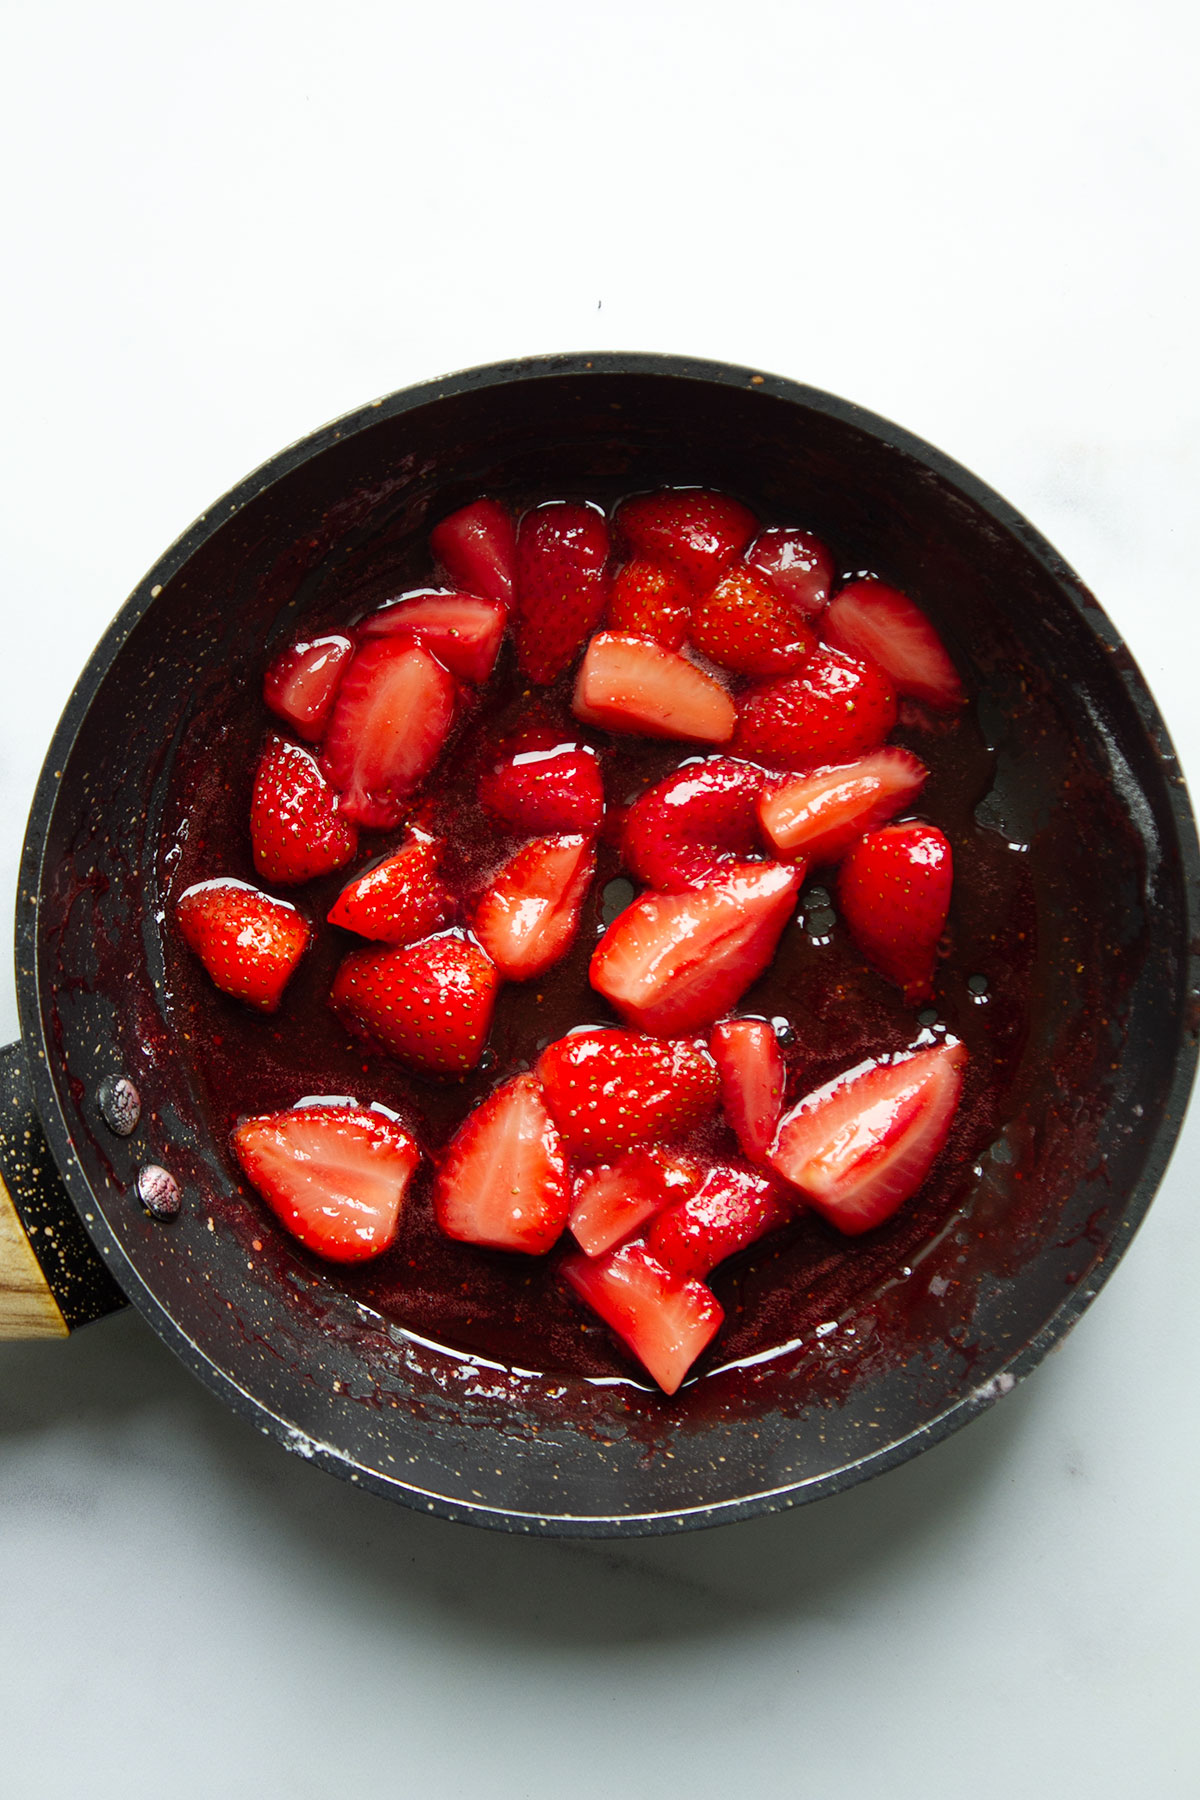 A frying pan containing the strawberrries which are being heated until softened.